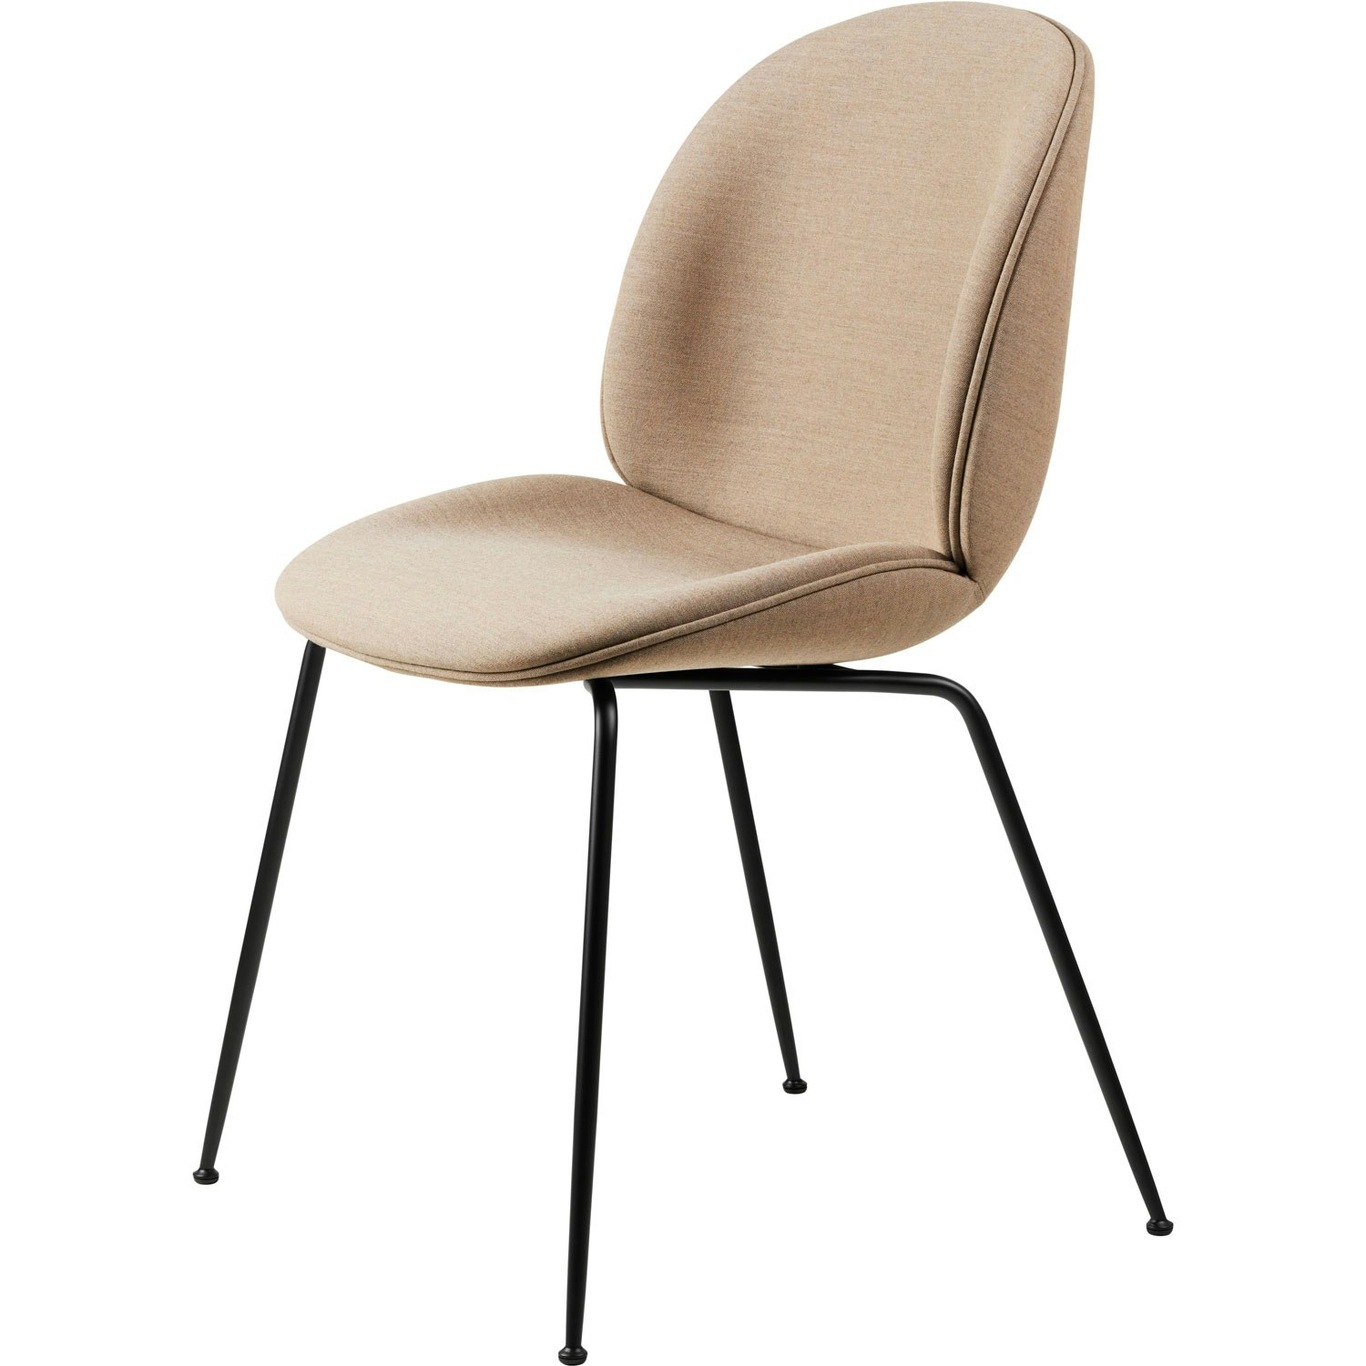 Beetle Chair Upholstered / Conical Base, Remix 3 233